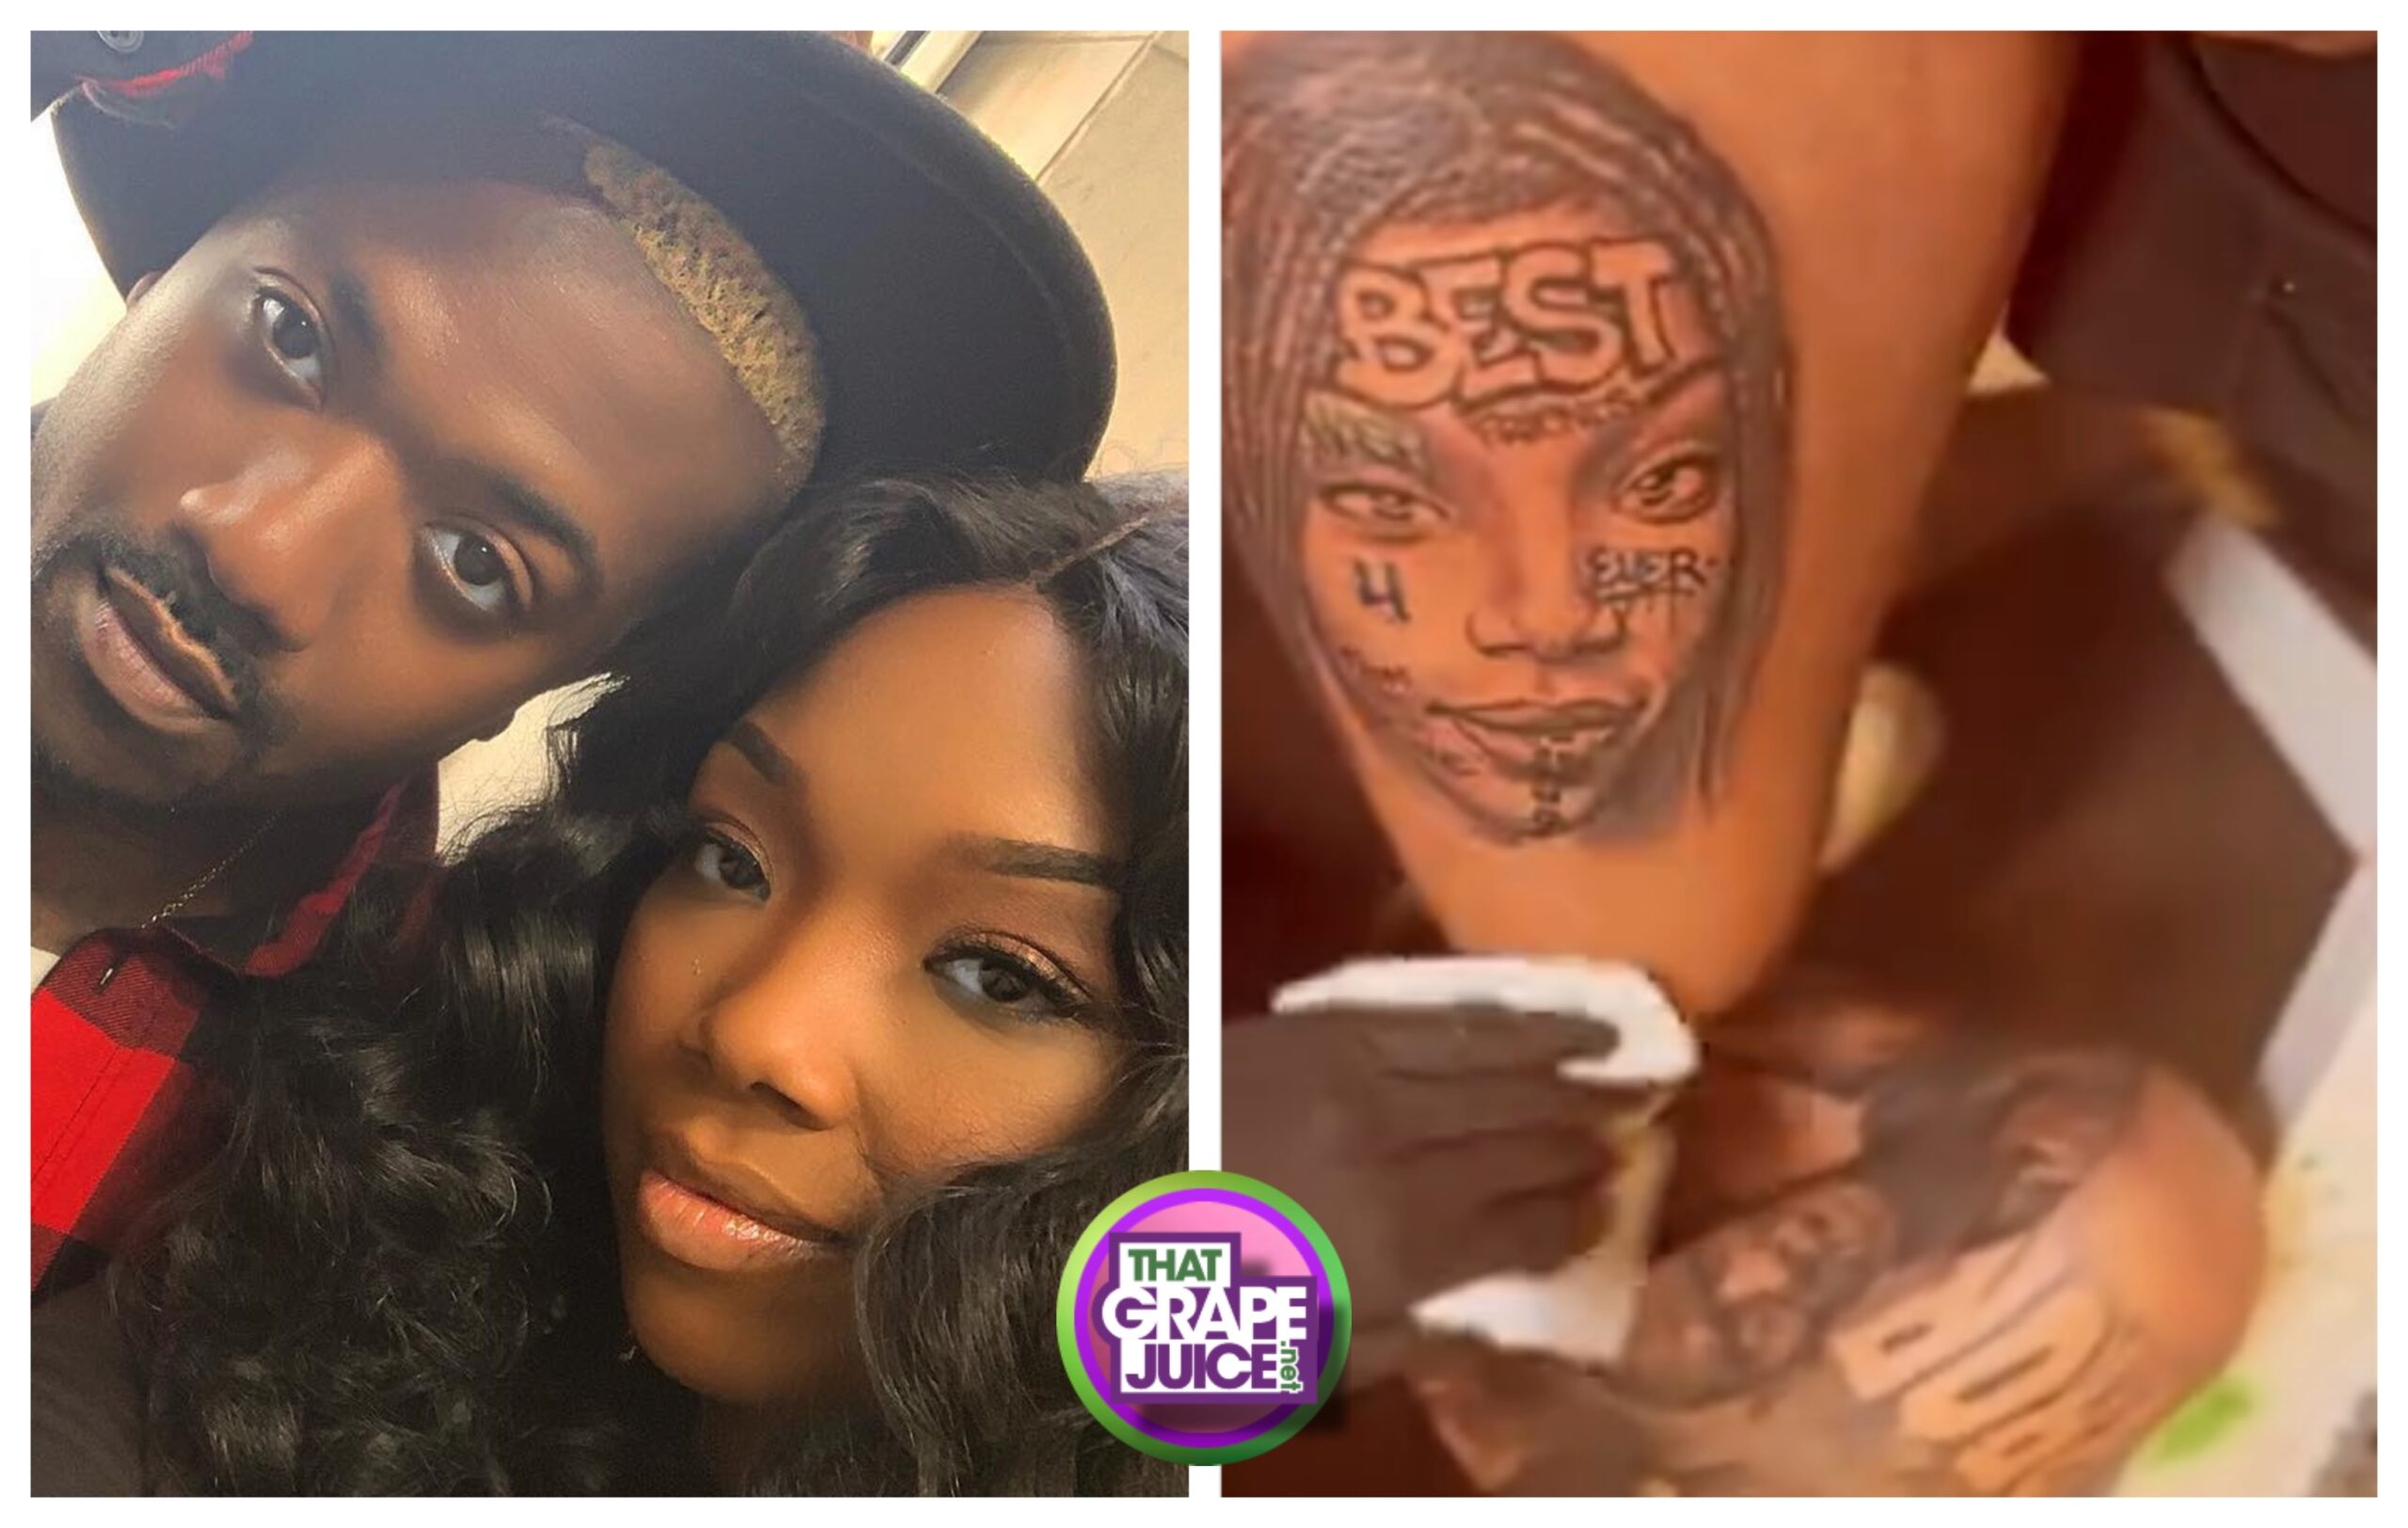 Ray J Brandy Tattoo Singers New Inking Roasted By Fans